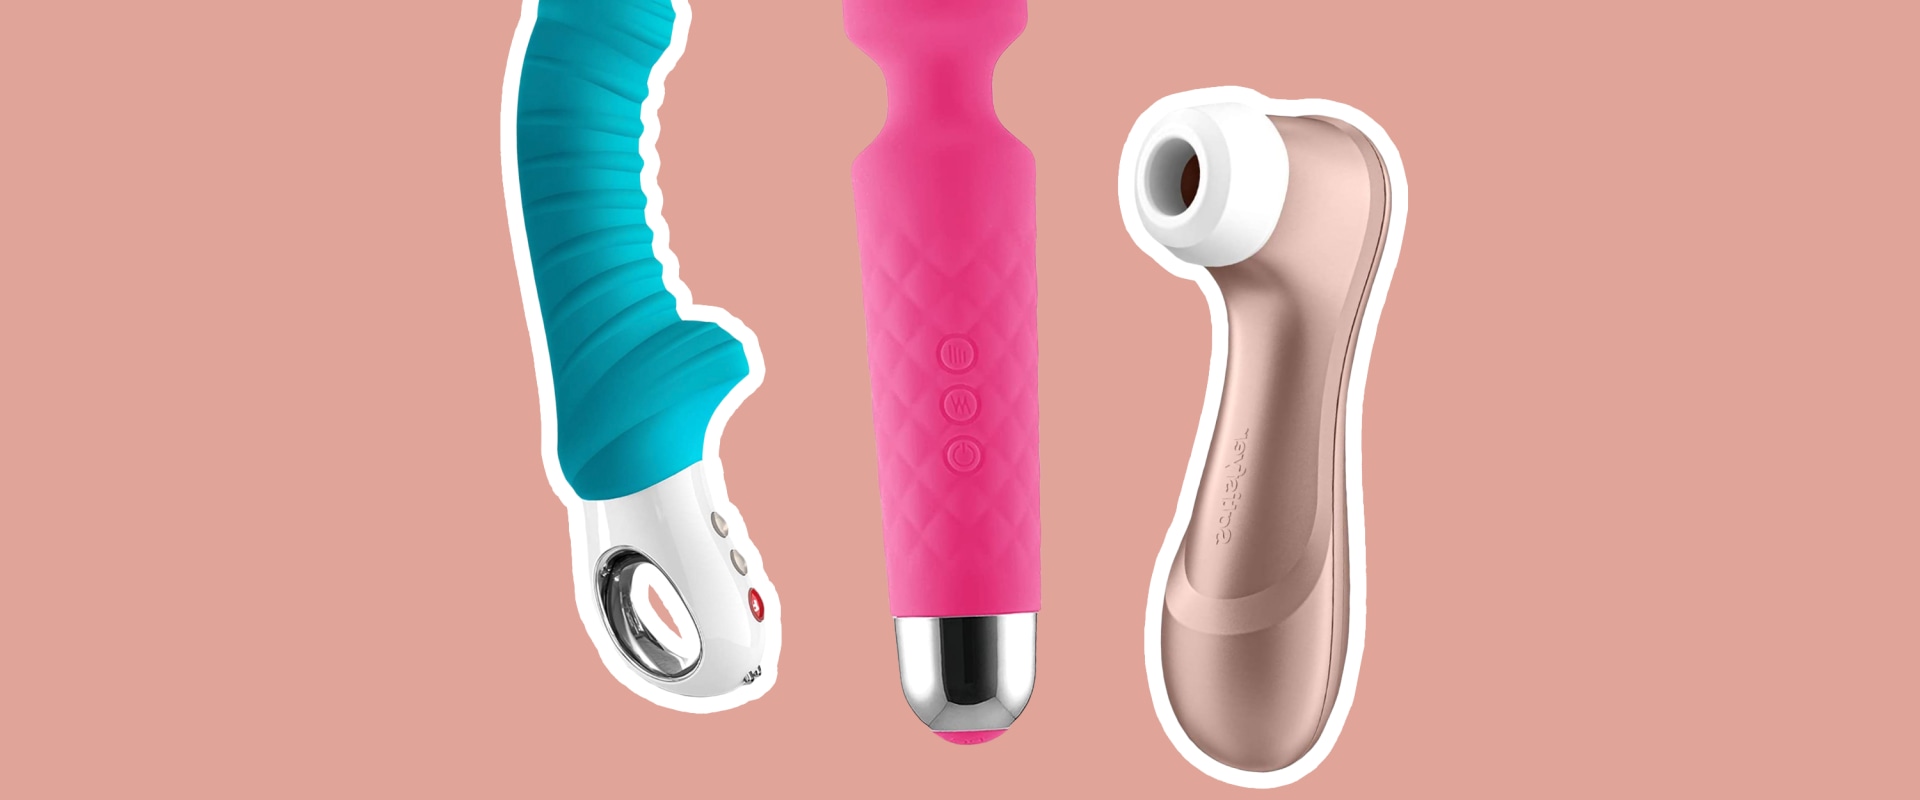 What to Look for When Shopping for Adult Toys Online